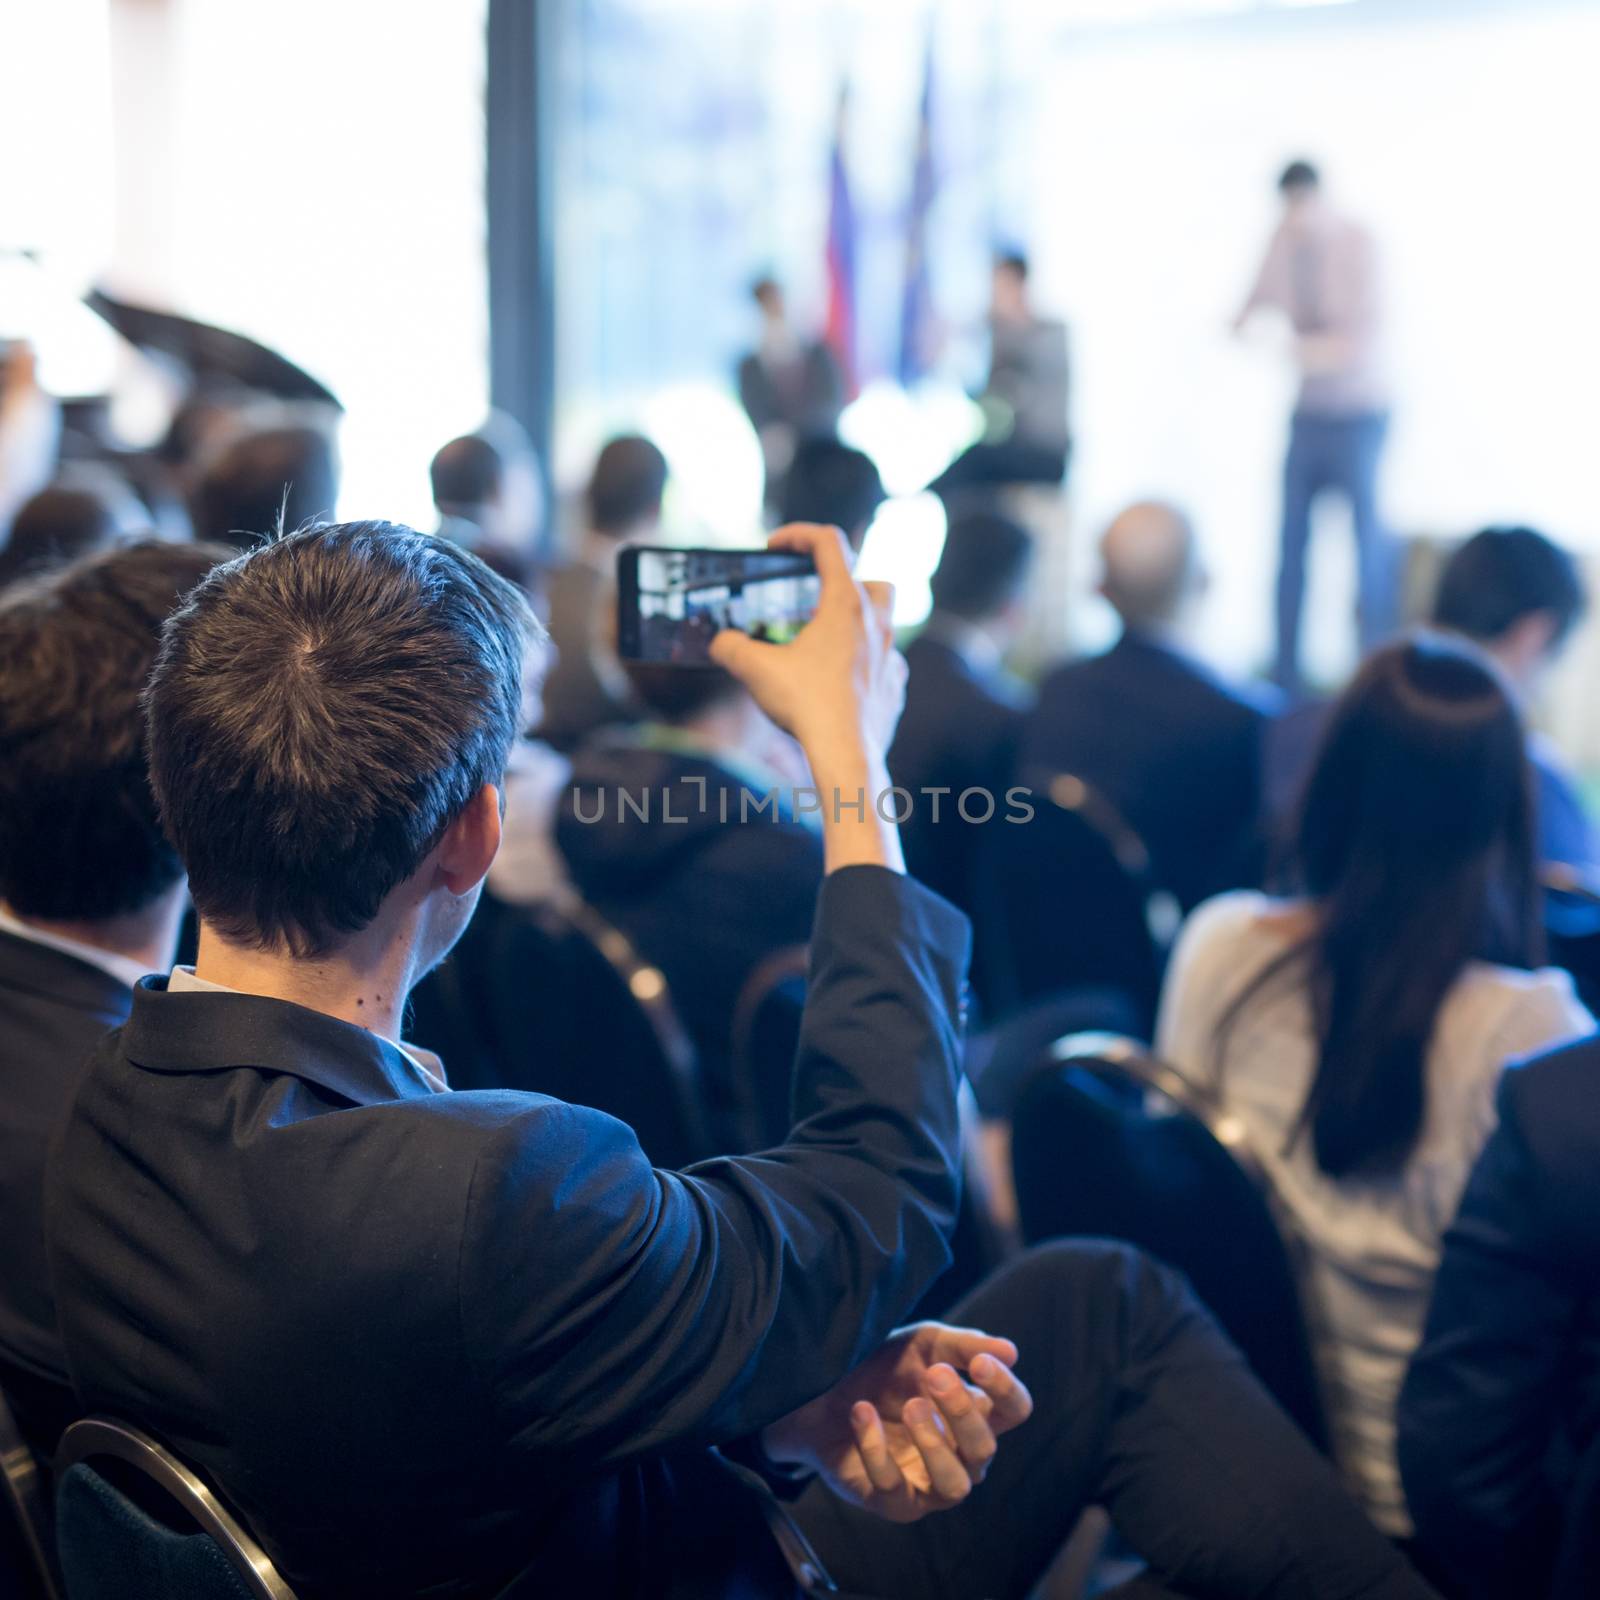 Businessman takes a picture of corporate business presentation at conference hall using smartphone. Business and Entrepreneurship concept. Focus on unrecognizable person in audience.